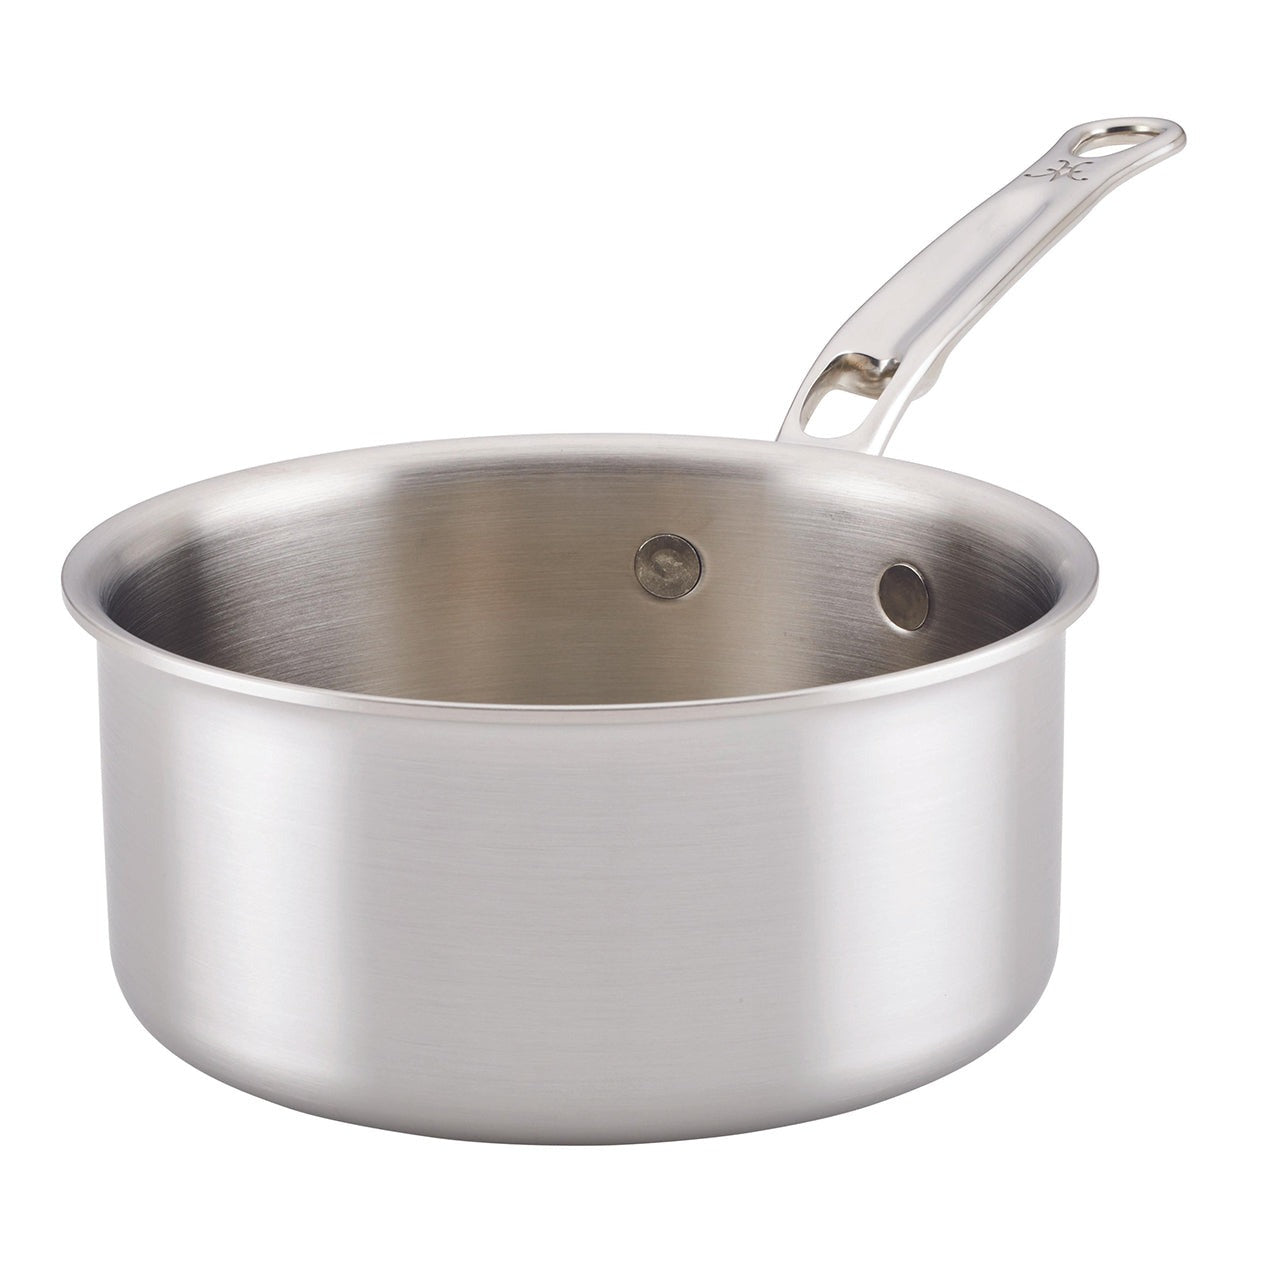 Hestan Nanobond Stainless Steel Soup Pot with Lid, 3-Quart on Food52